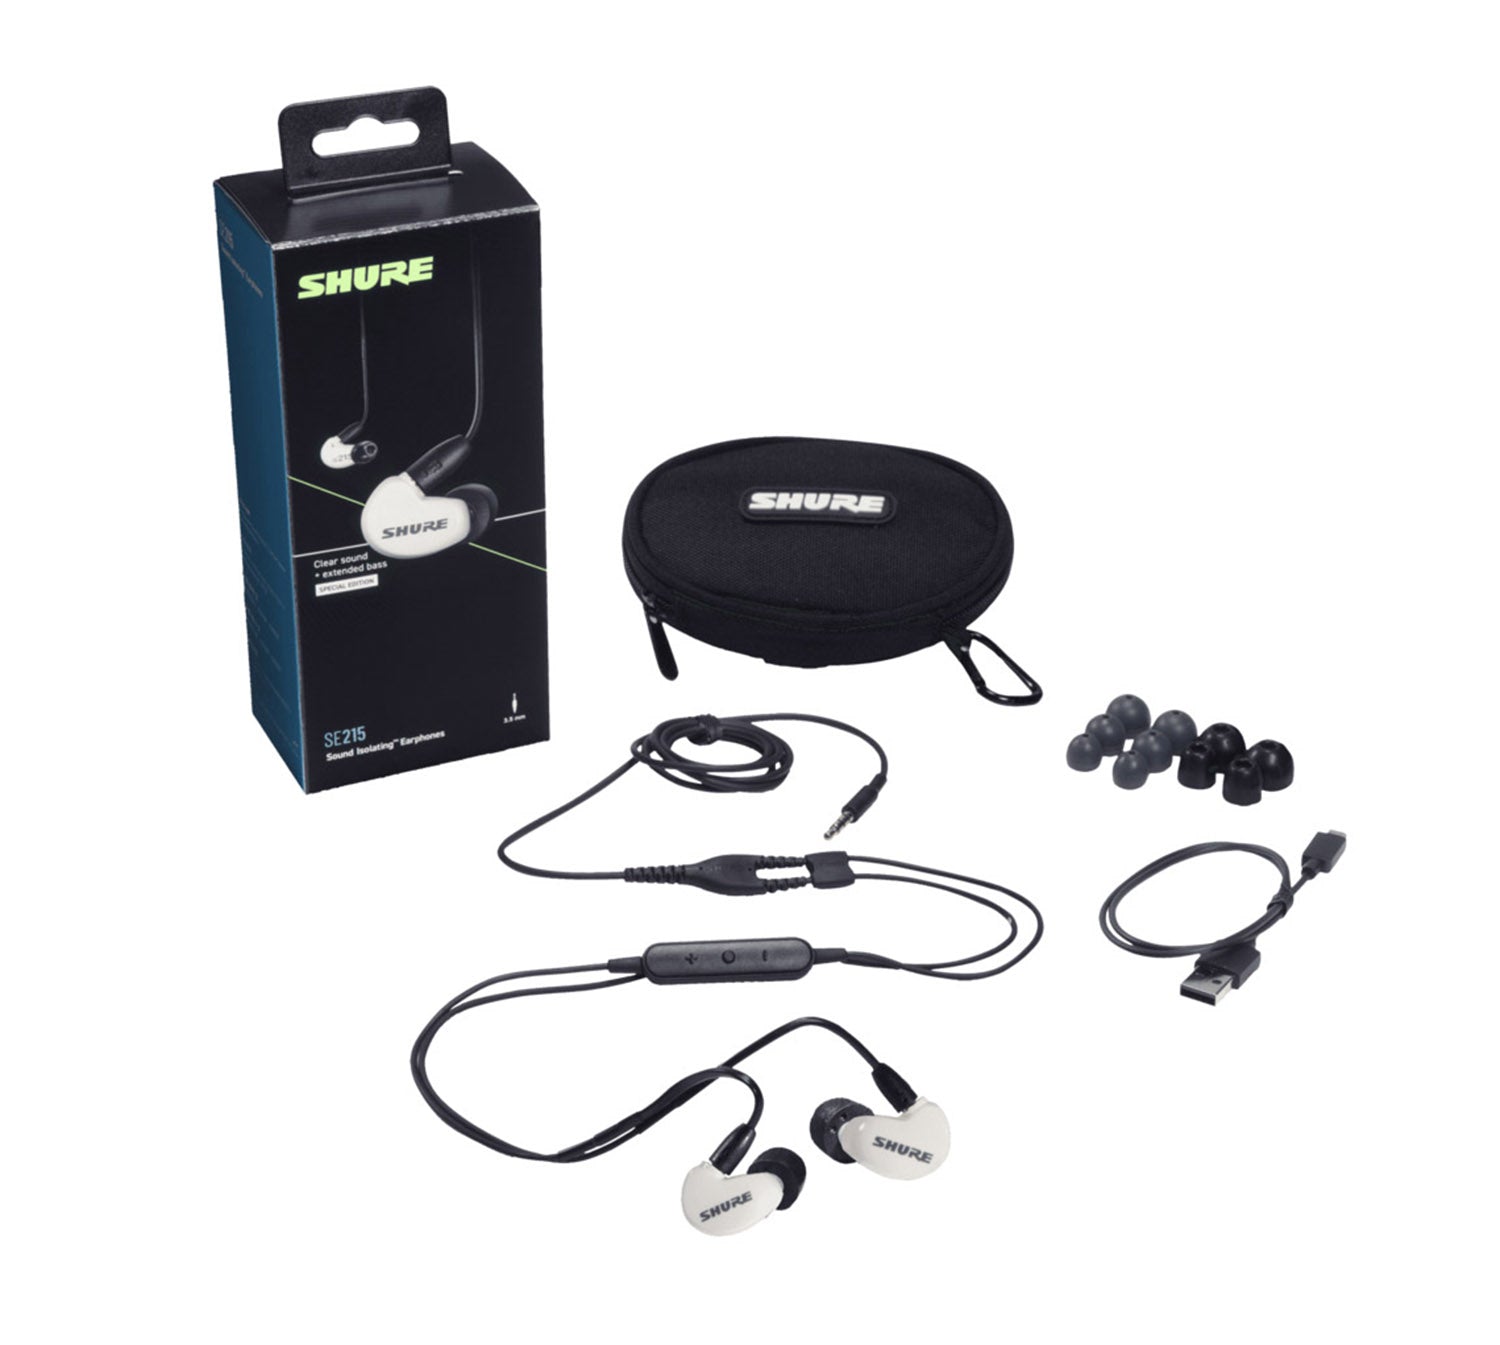 B-Stock: Shure SE215SPE-W+UNI White Special Edition Isolating Earphones With Universal 3.5 mm Remote and Mic Cable - Hollywood DJ